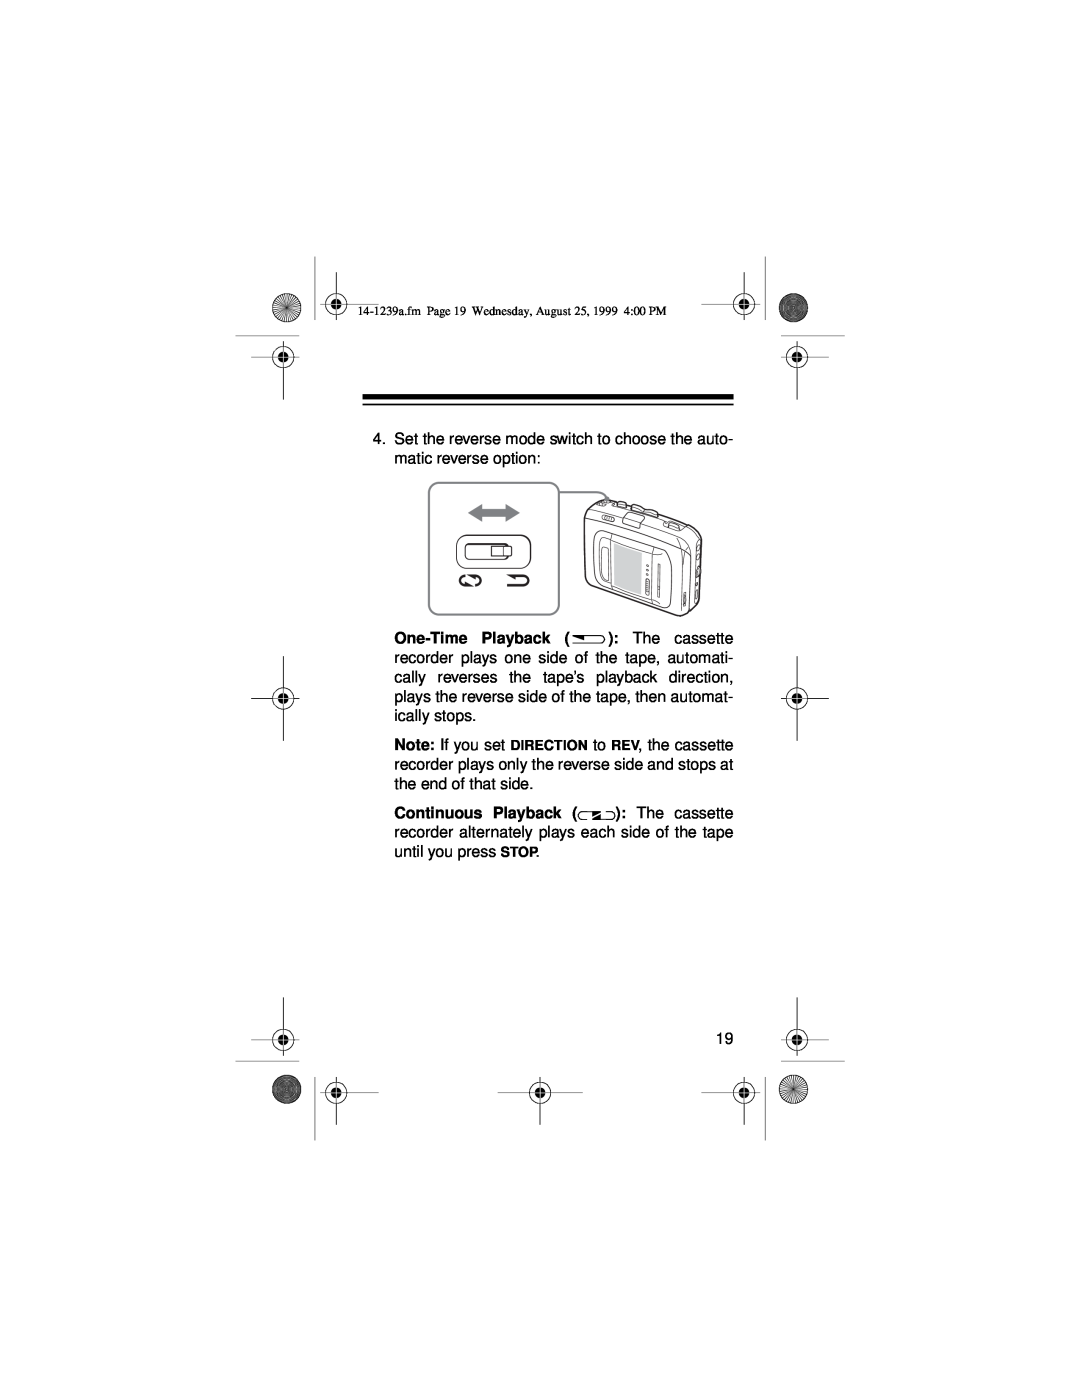 Optimus SCR-96 owner manual Set the reverse mode switch to choose the auto- matic reverse option 